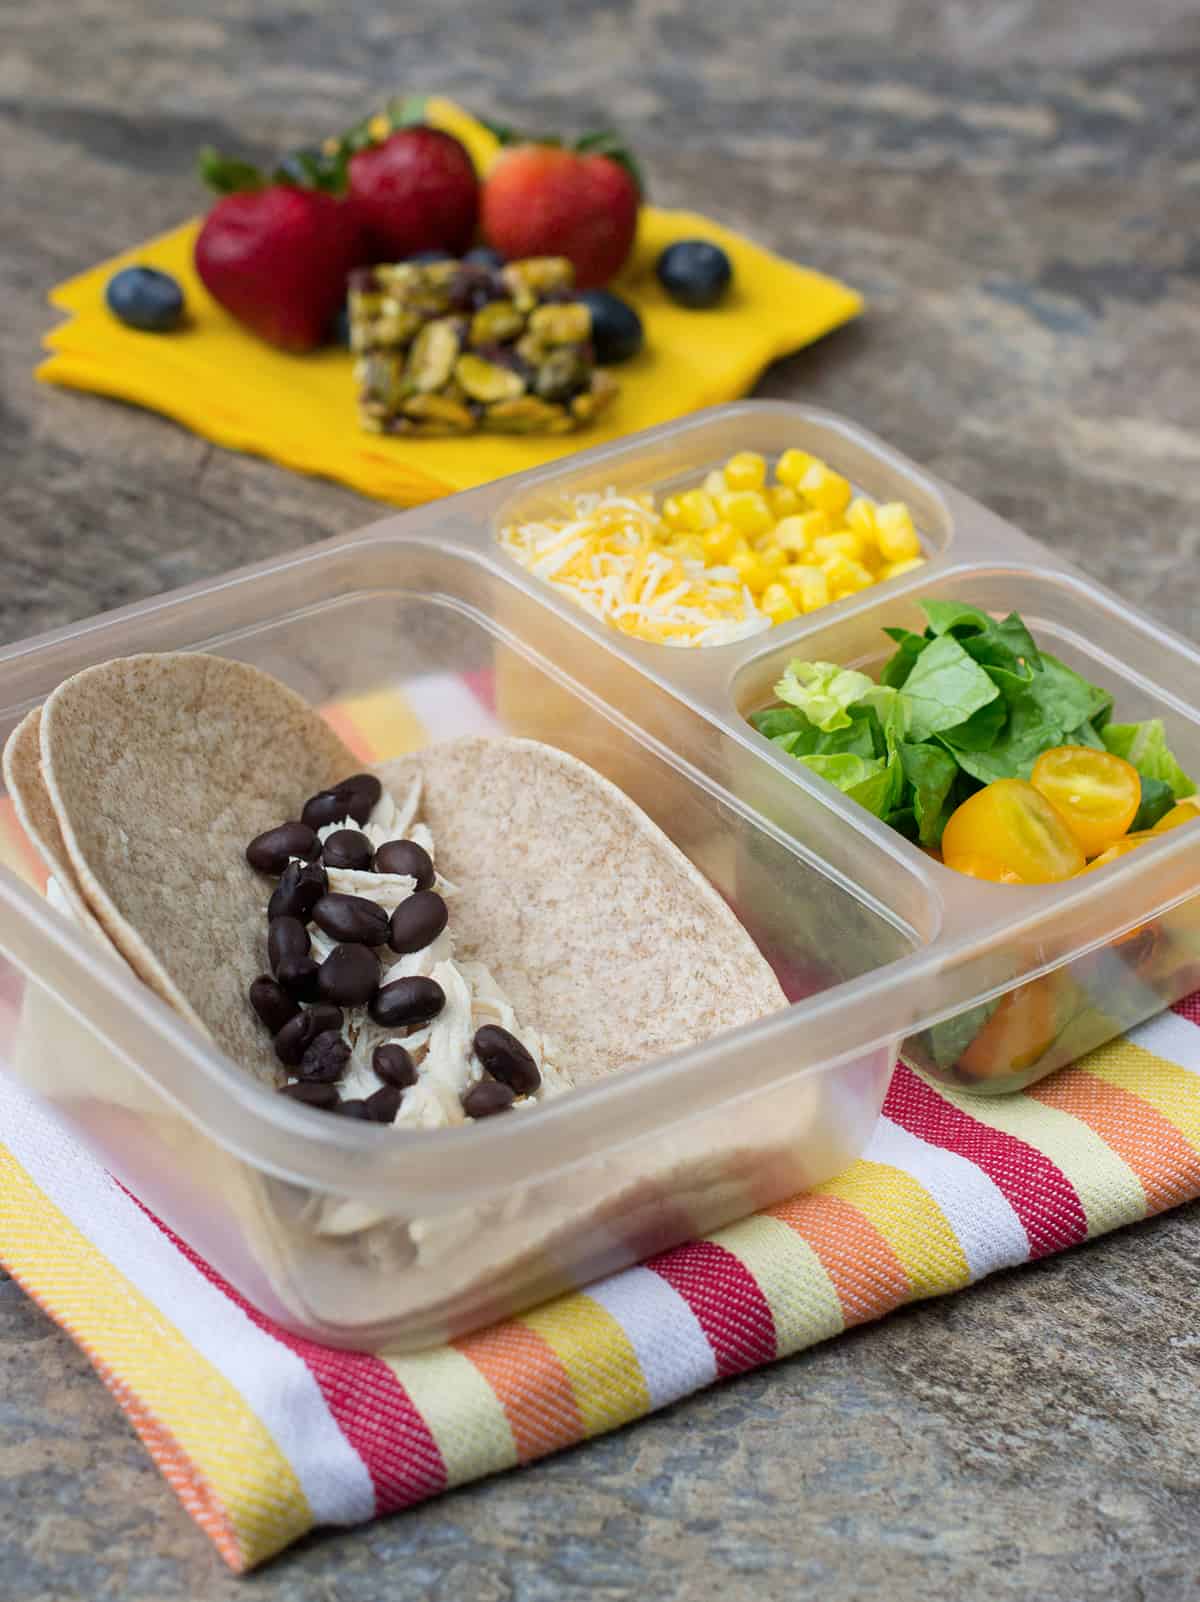 6 Bento Box Lunch Ideas to Try, From Taco Salad to Build-Your-Own Pizza -  Brightly